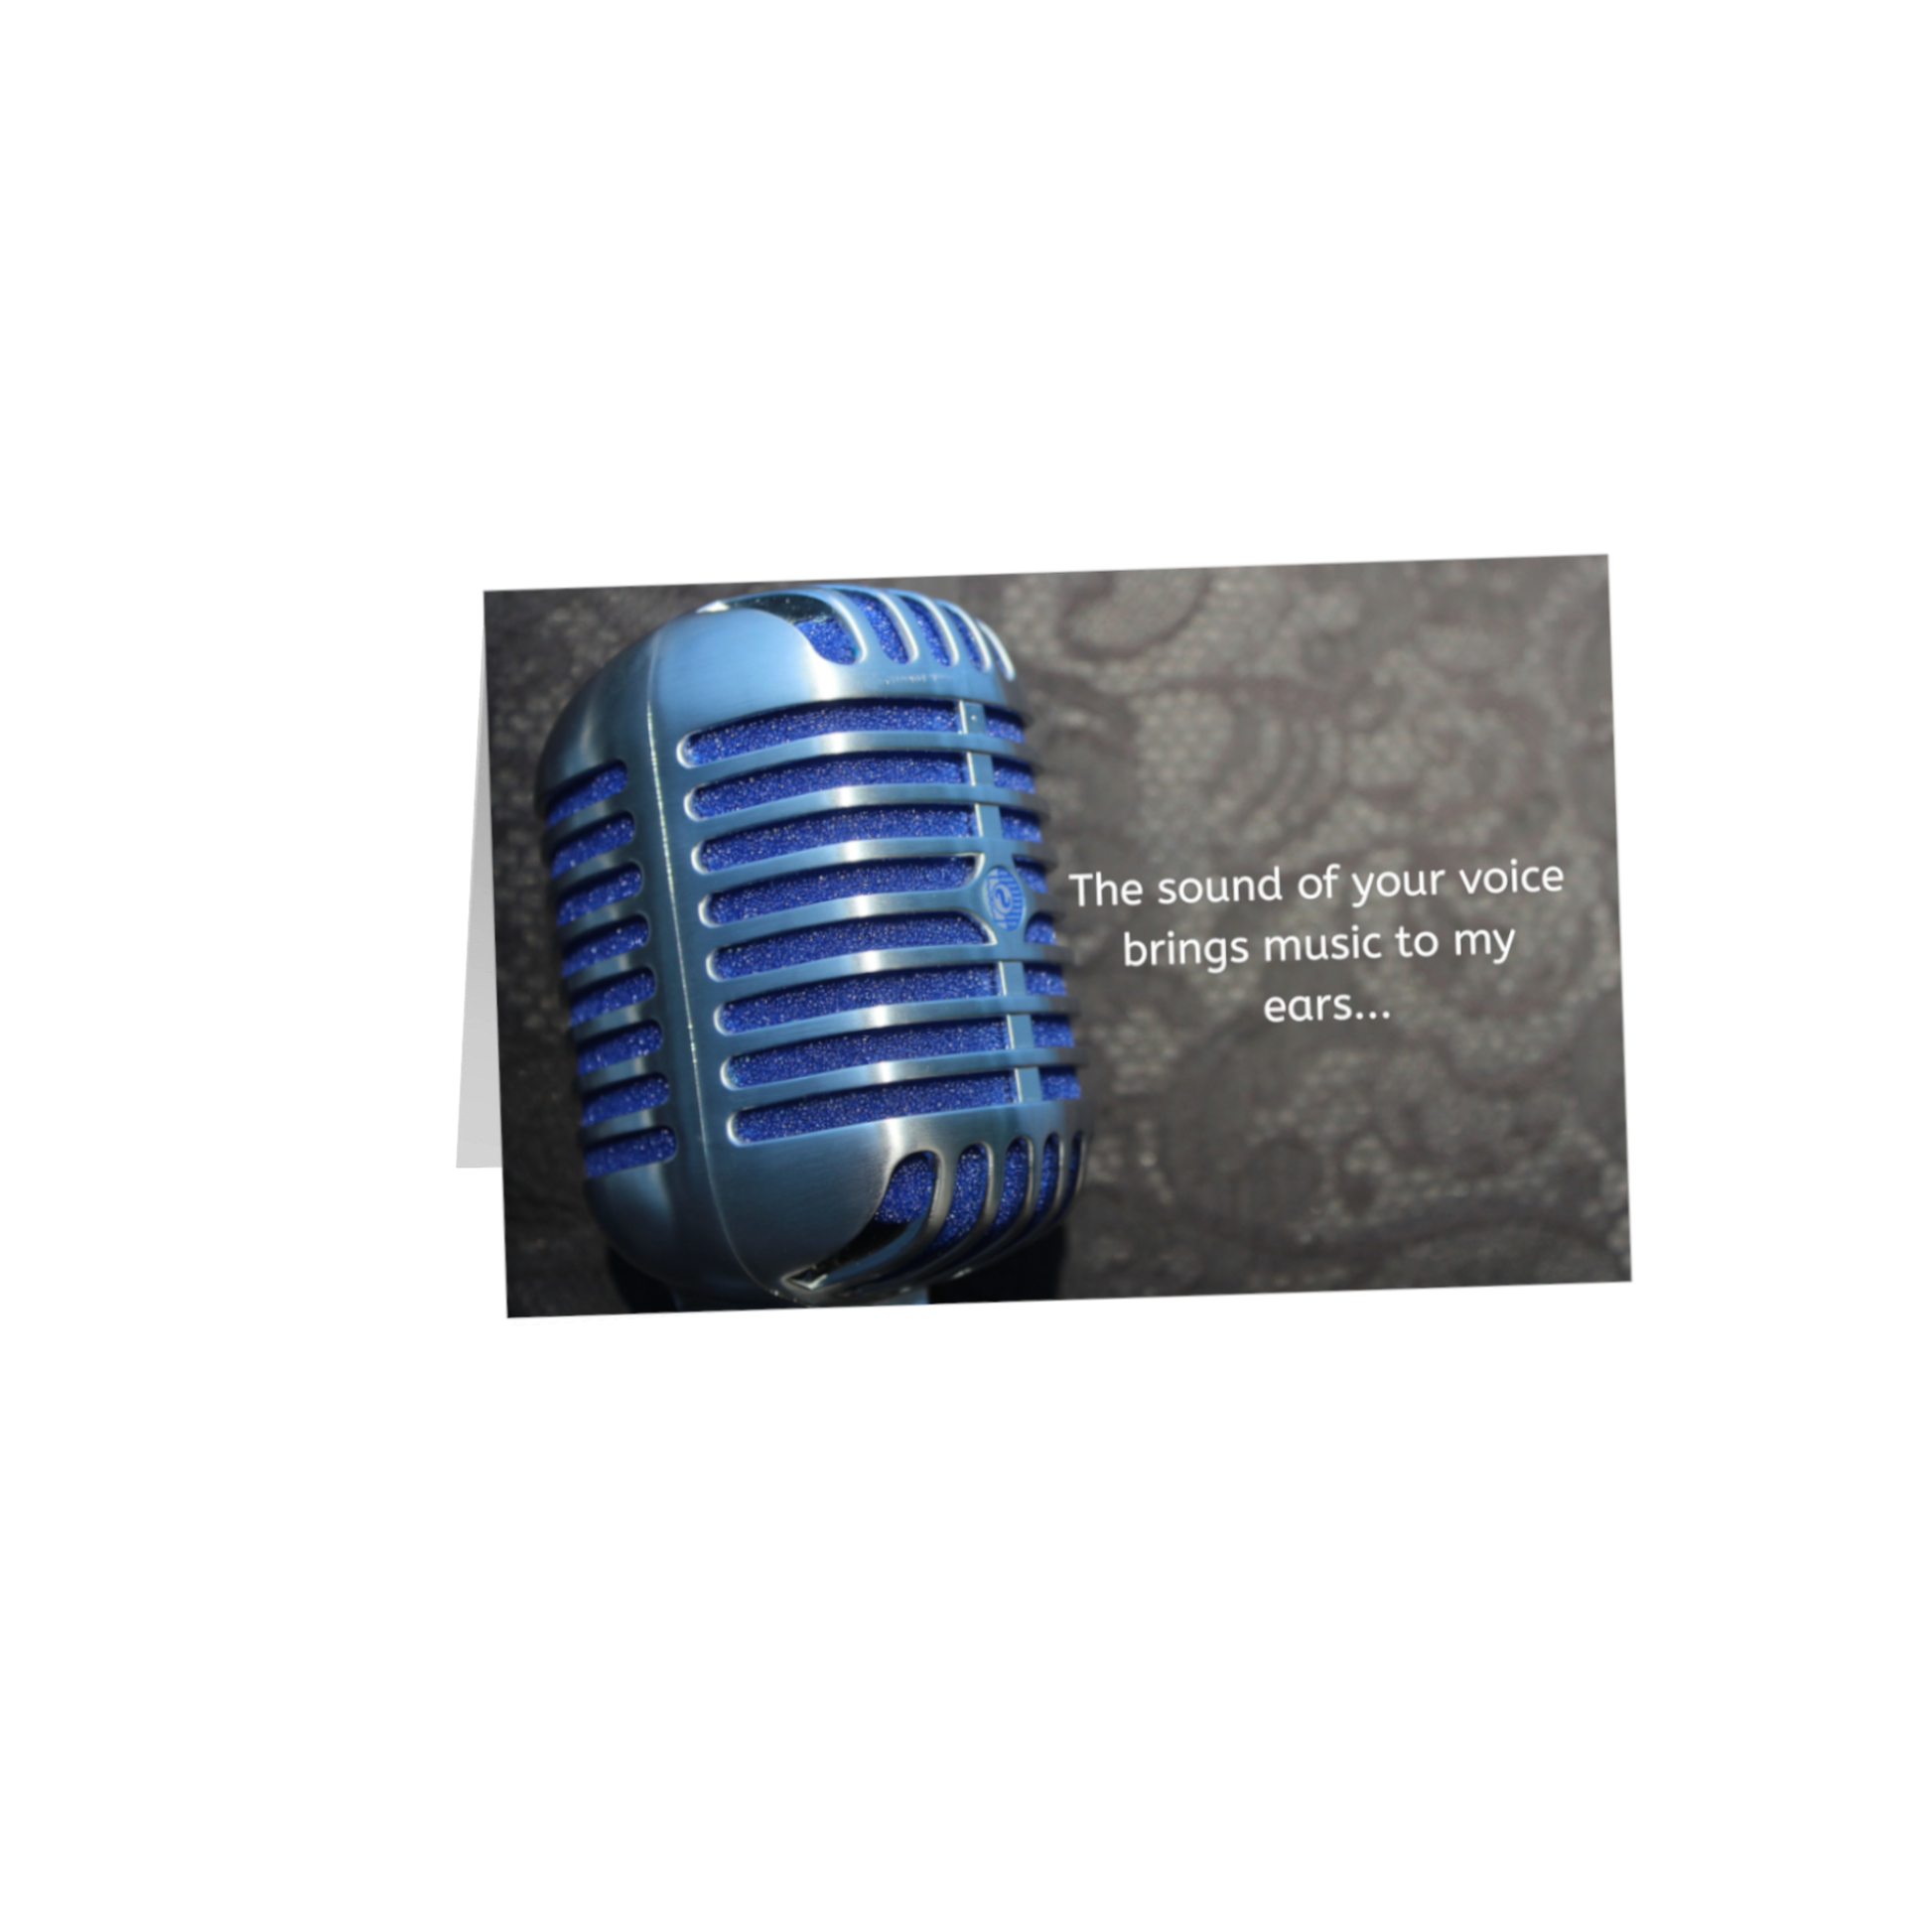 The sound of your voice brings 8.5x5.5 Greeting Card